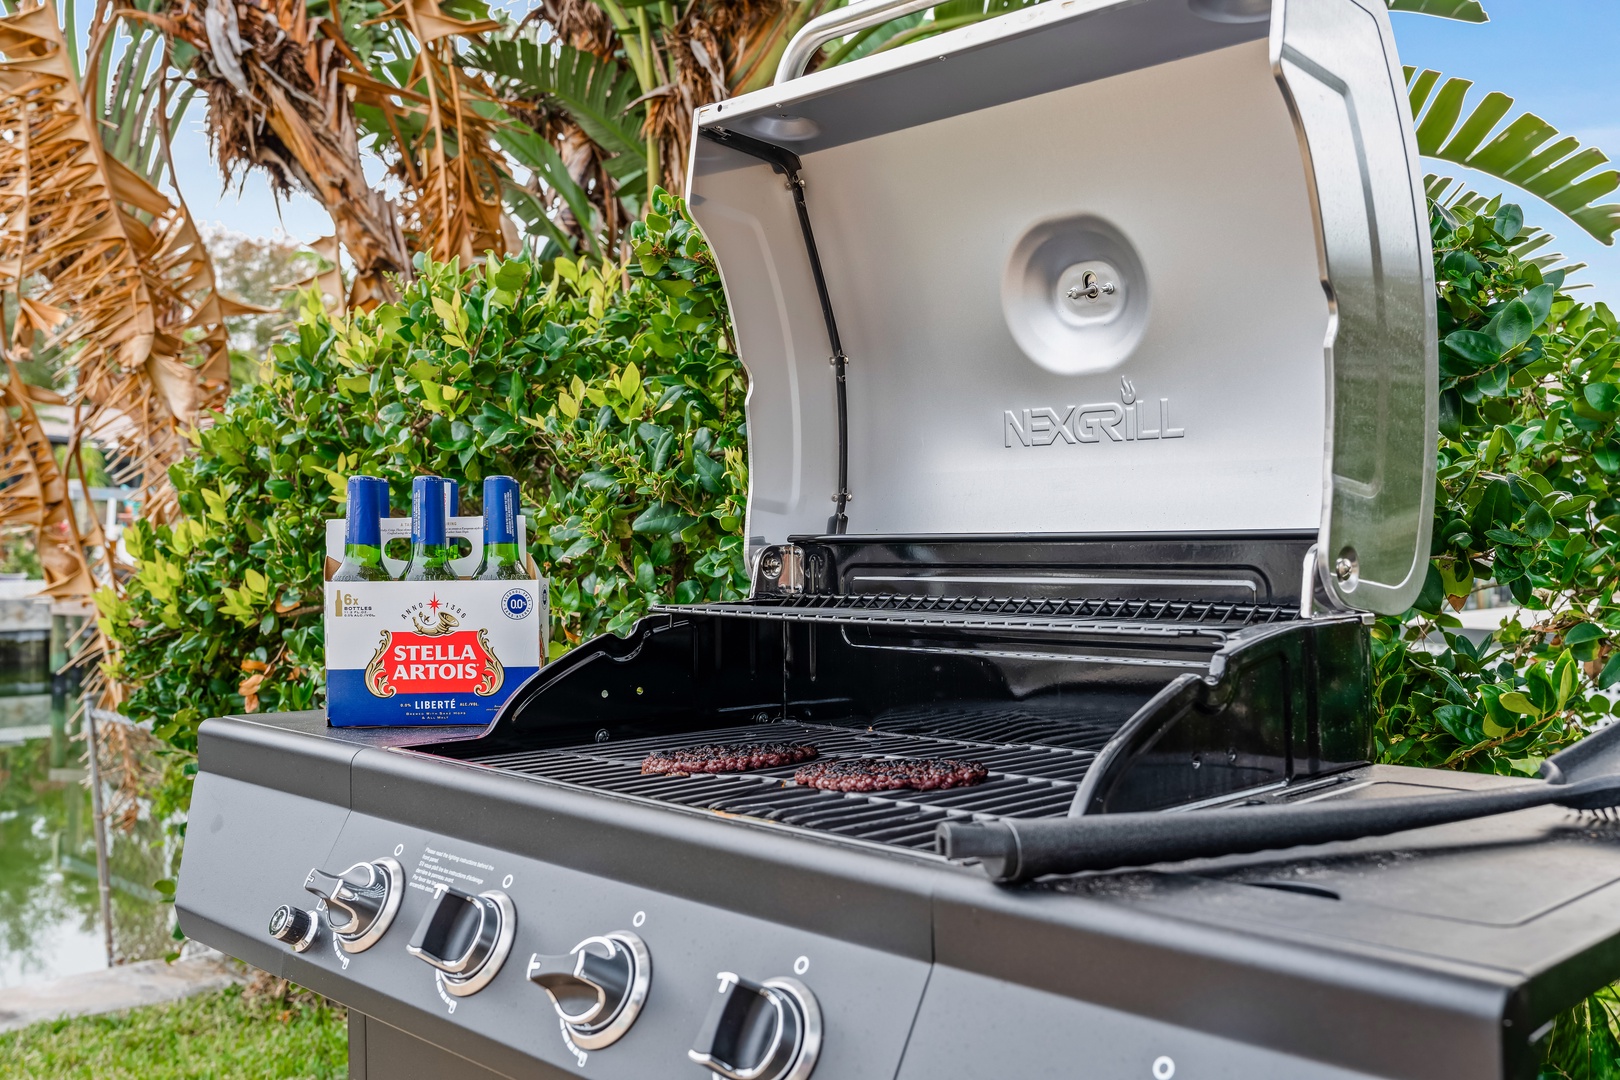 Take in the fresh air while you grill up a feast!